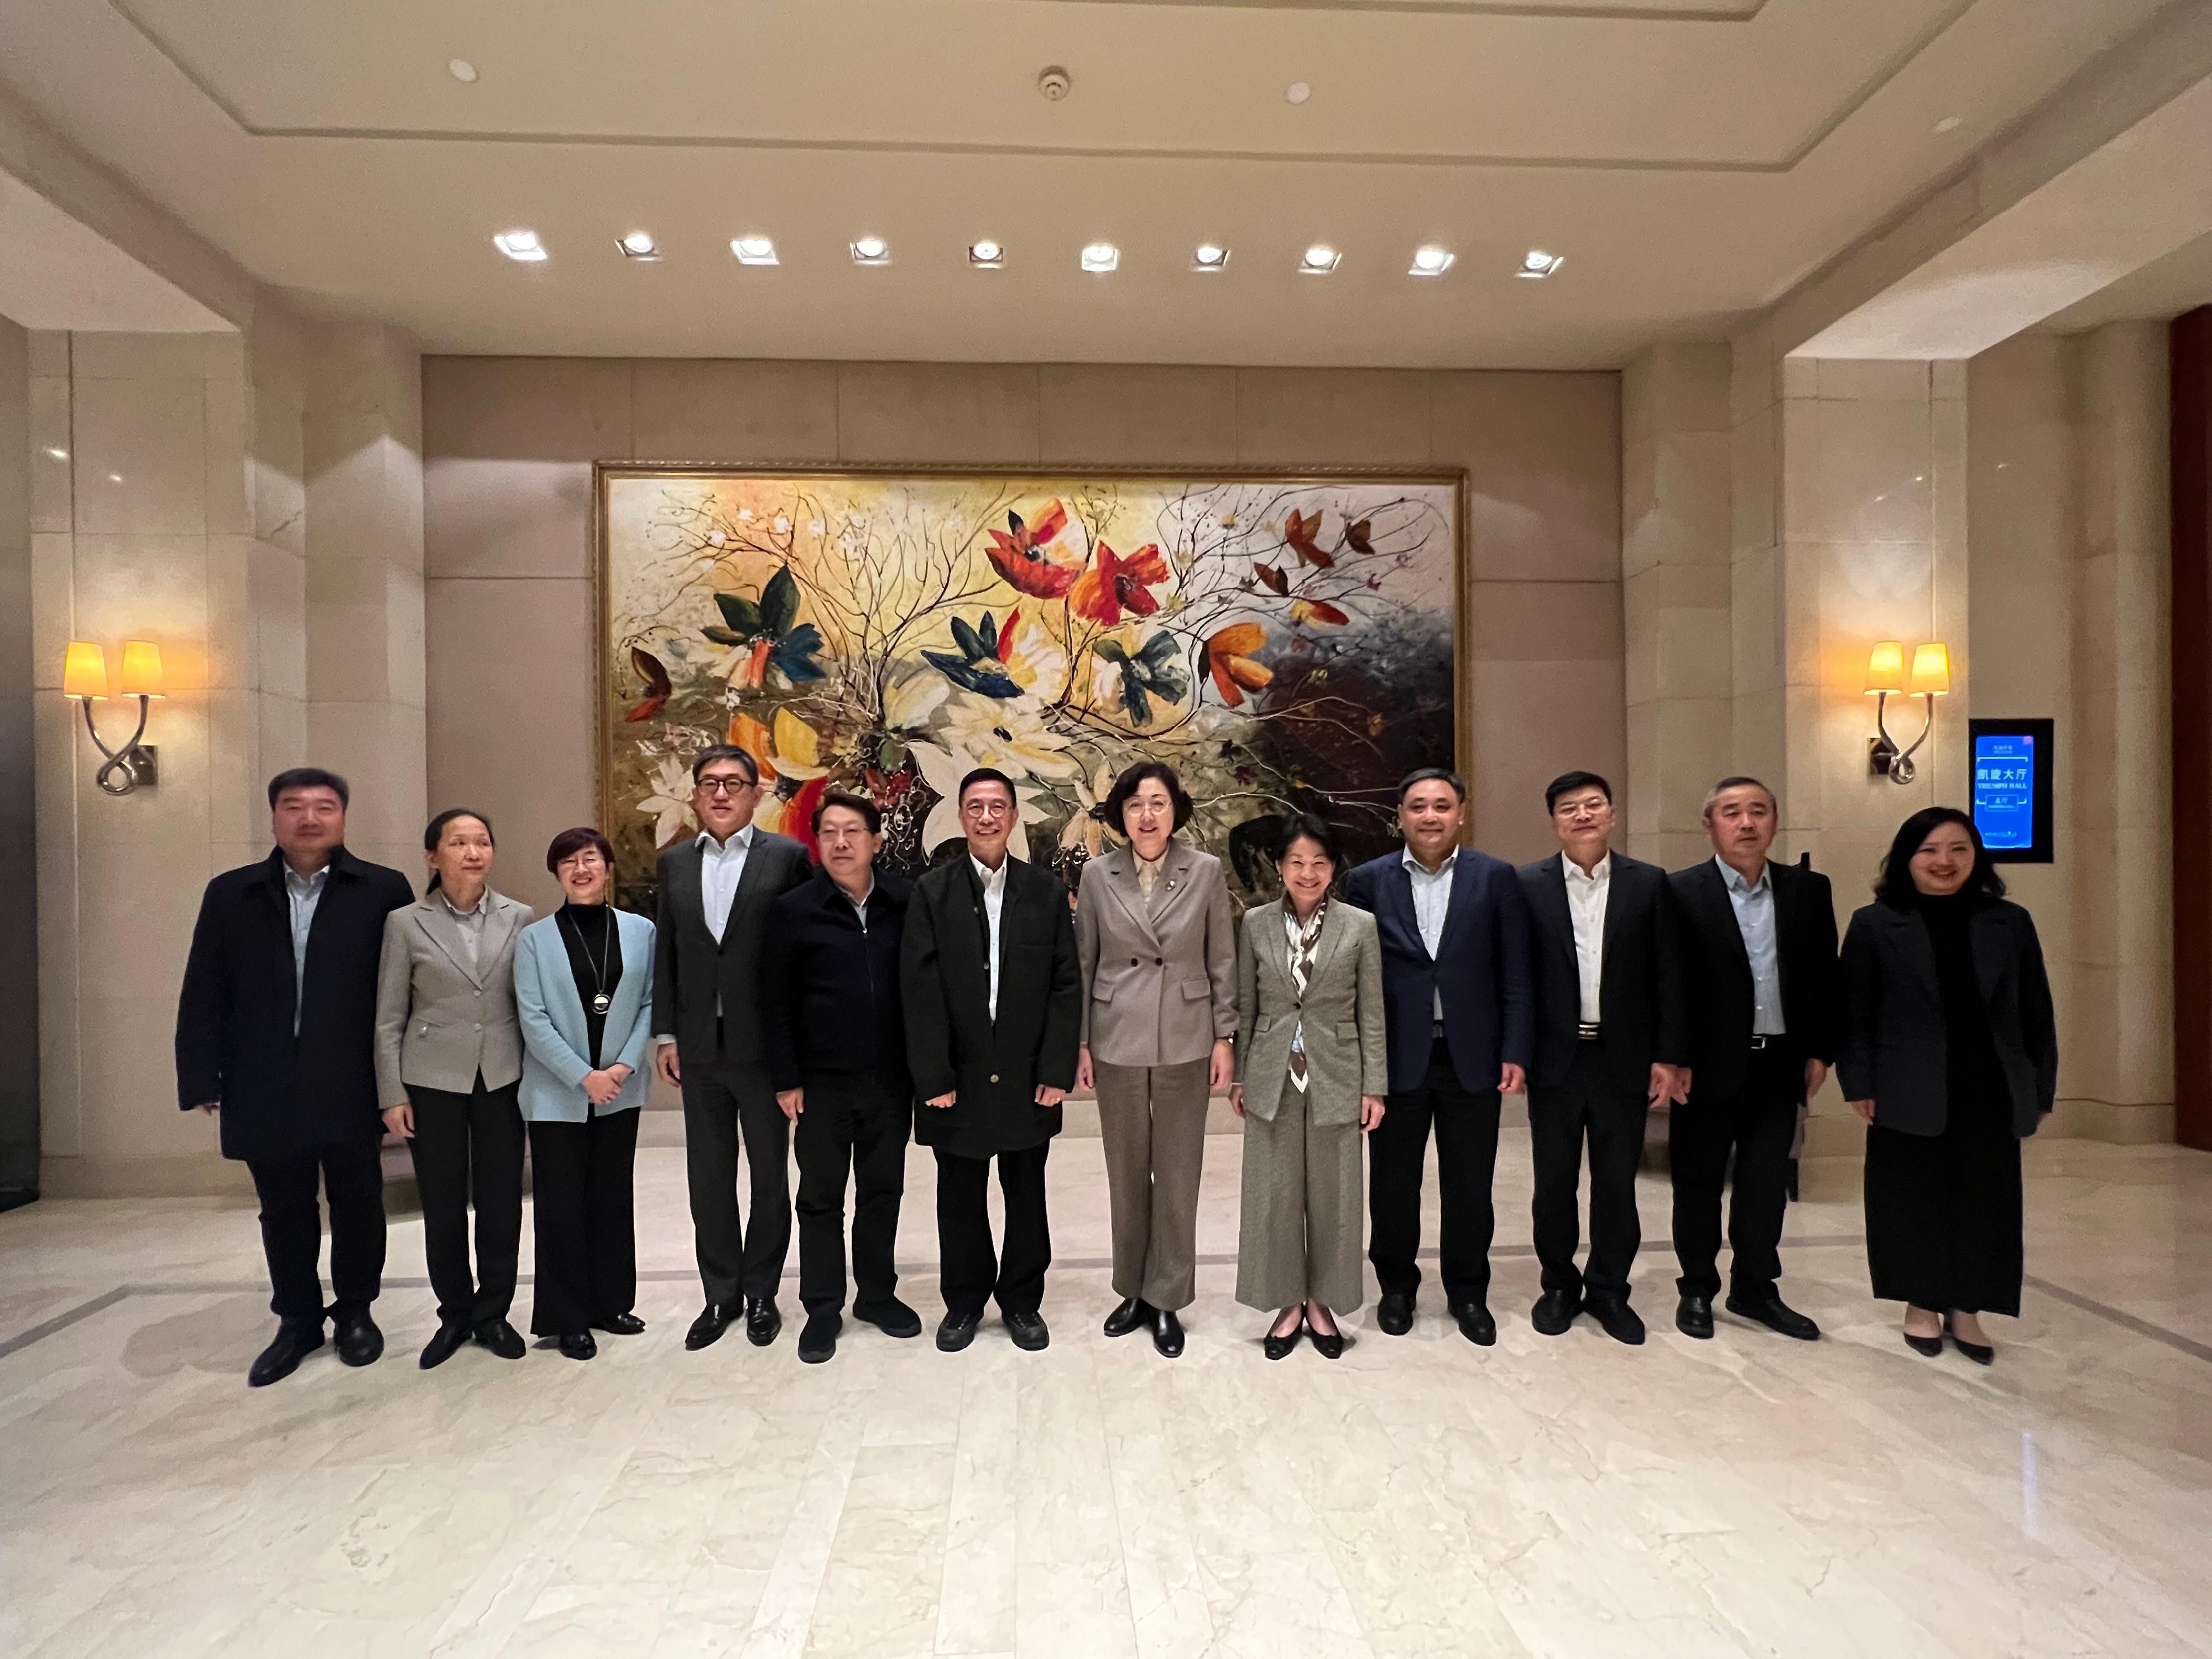 The Secretary for Culture, Sports and Tourism, Mr Kevin Yeung (sixth left), visited Xi'an and Qingdao to promote Hong Kong tourism. On the second day of the visit (March 13), he arrives in Qingdao and meets with Deputy Secretary of the CPC Qingdao Municipal Committee Ms Zhang Hui (sixth right) to exchange views on driving tourism developments.
